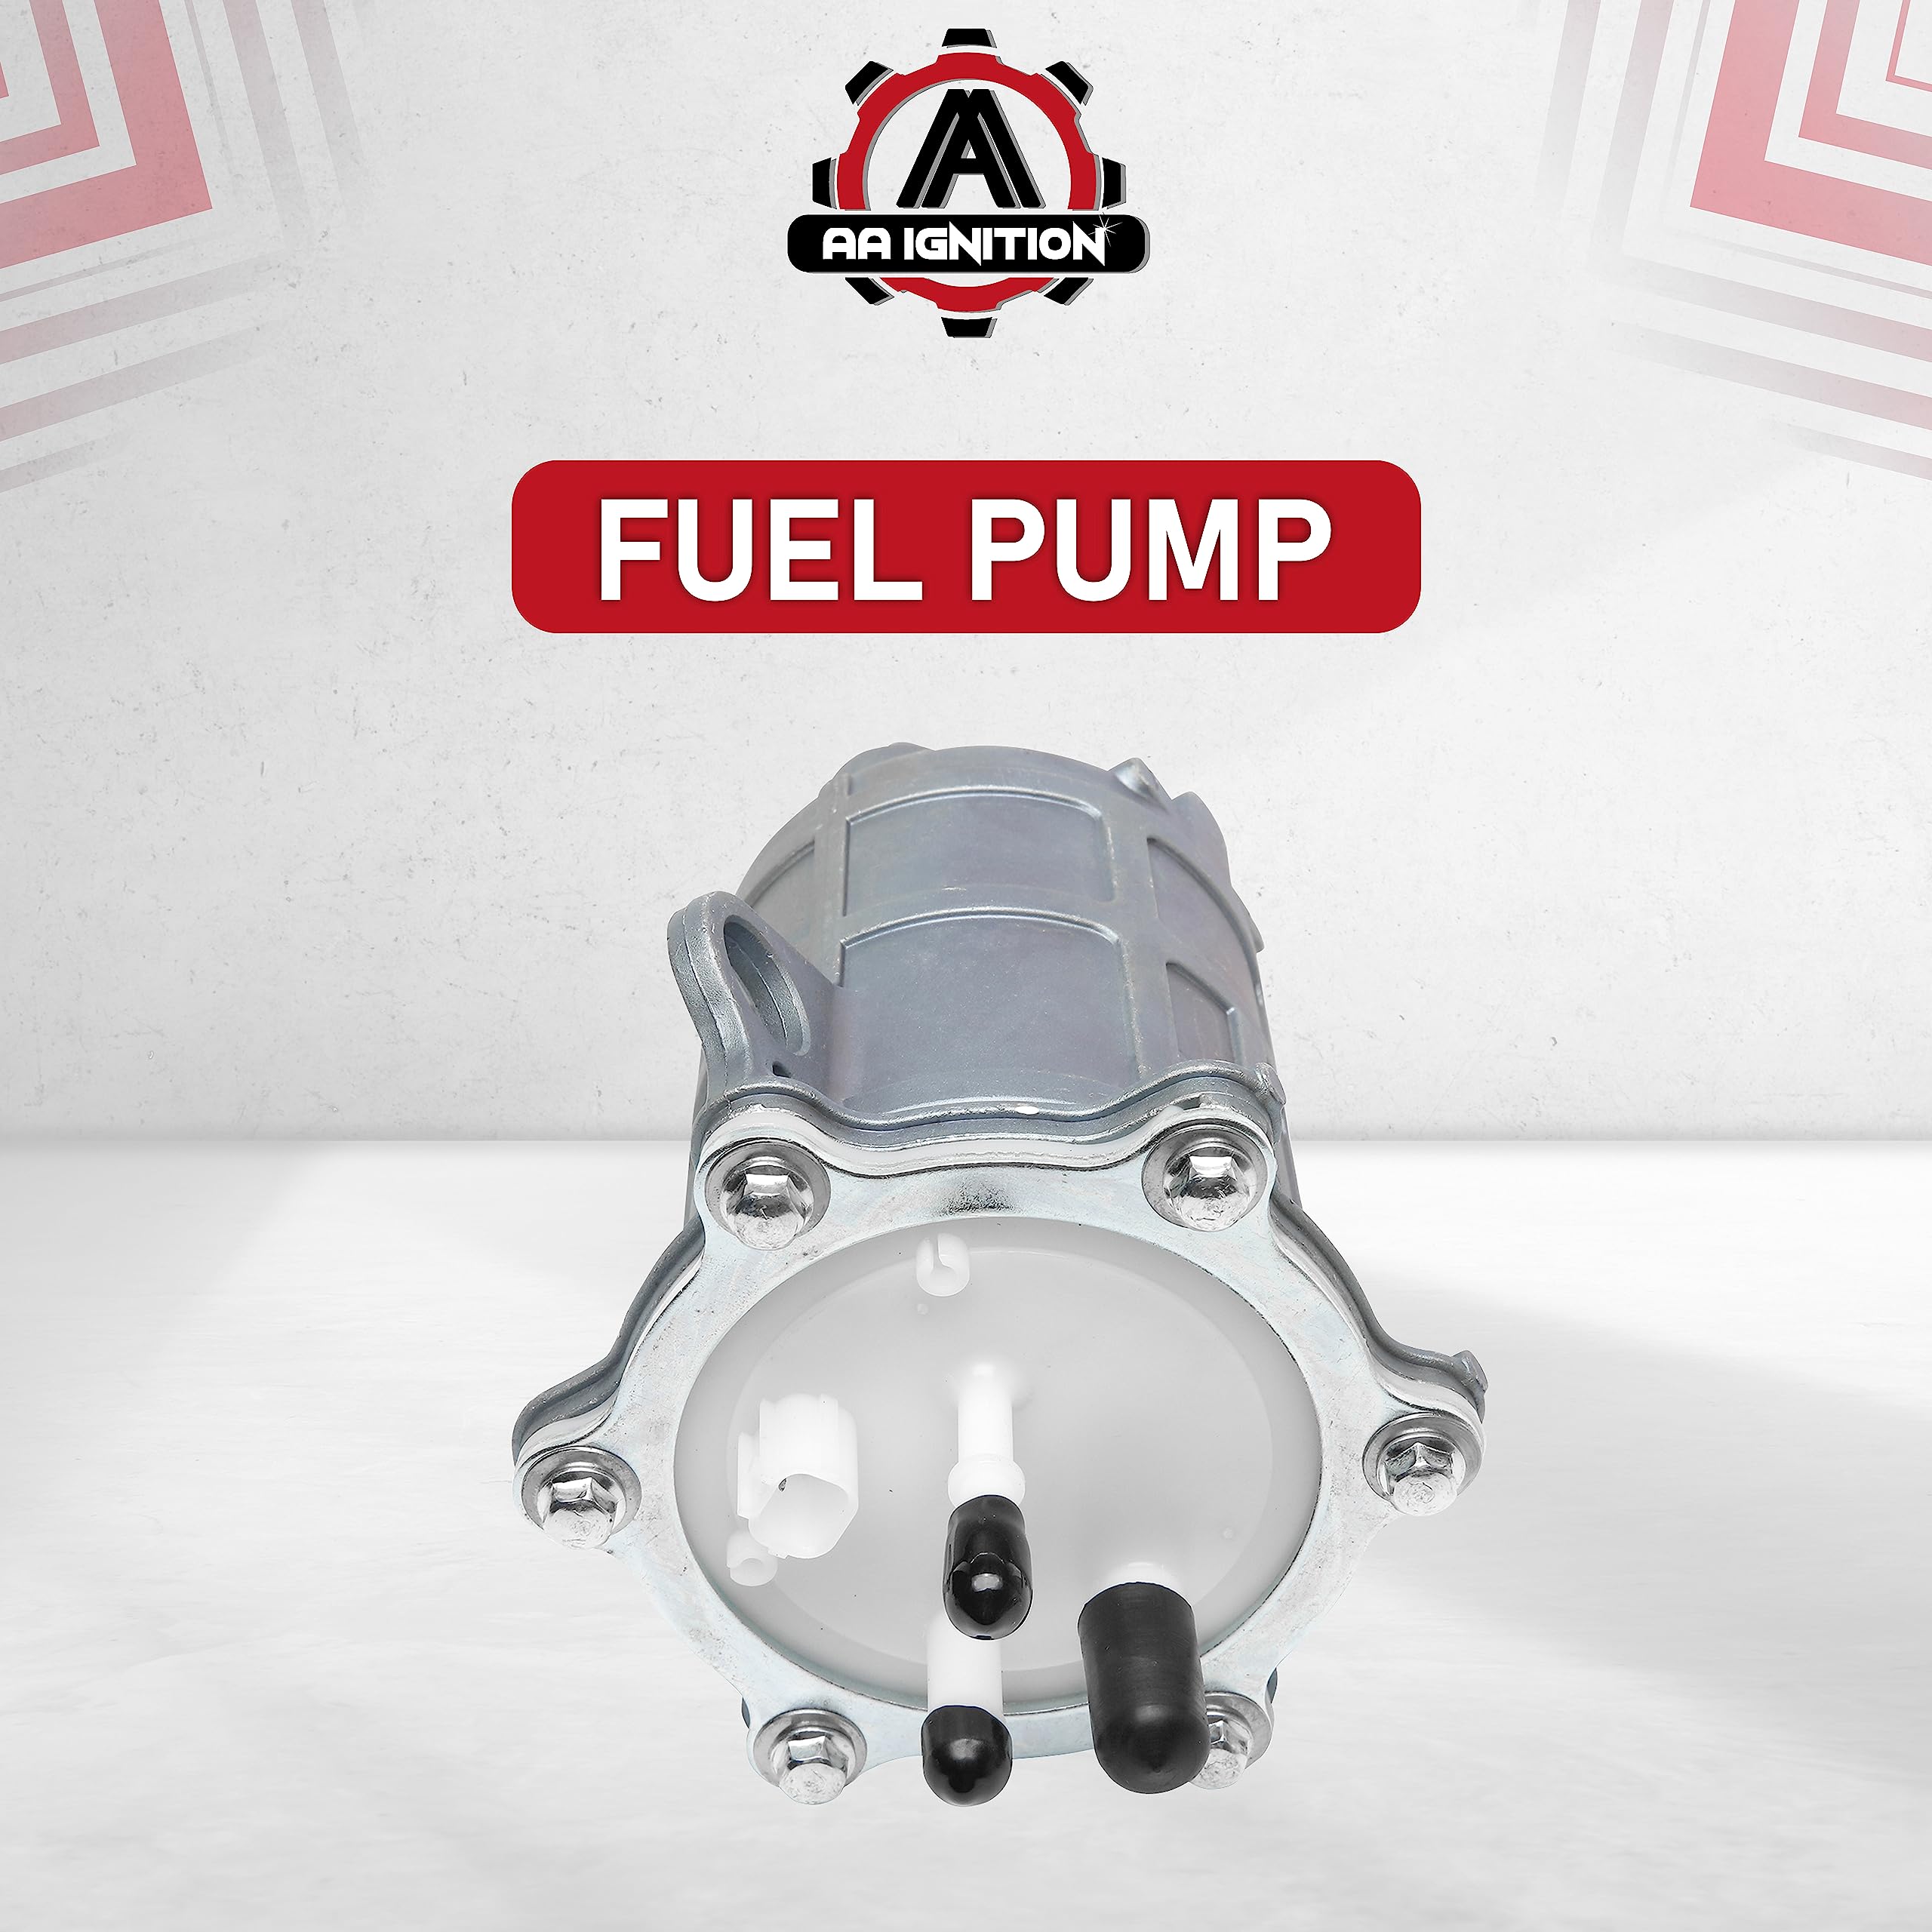 Replacement Fuel Pump - Compatible with Honda ATV 4x4 2x4-2012-2013 Foreman 500 TRX500, 2007-2014 Rancher 420 TRX420, 2008-2009 TRX700XX - Replaces 16700-HP5-602  - Like New